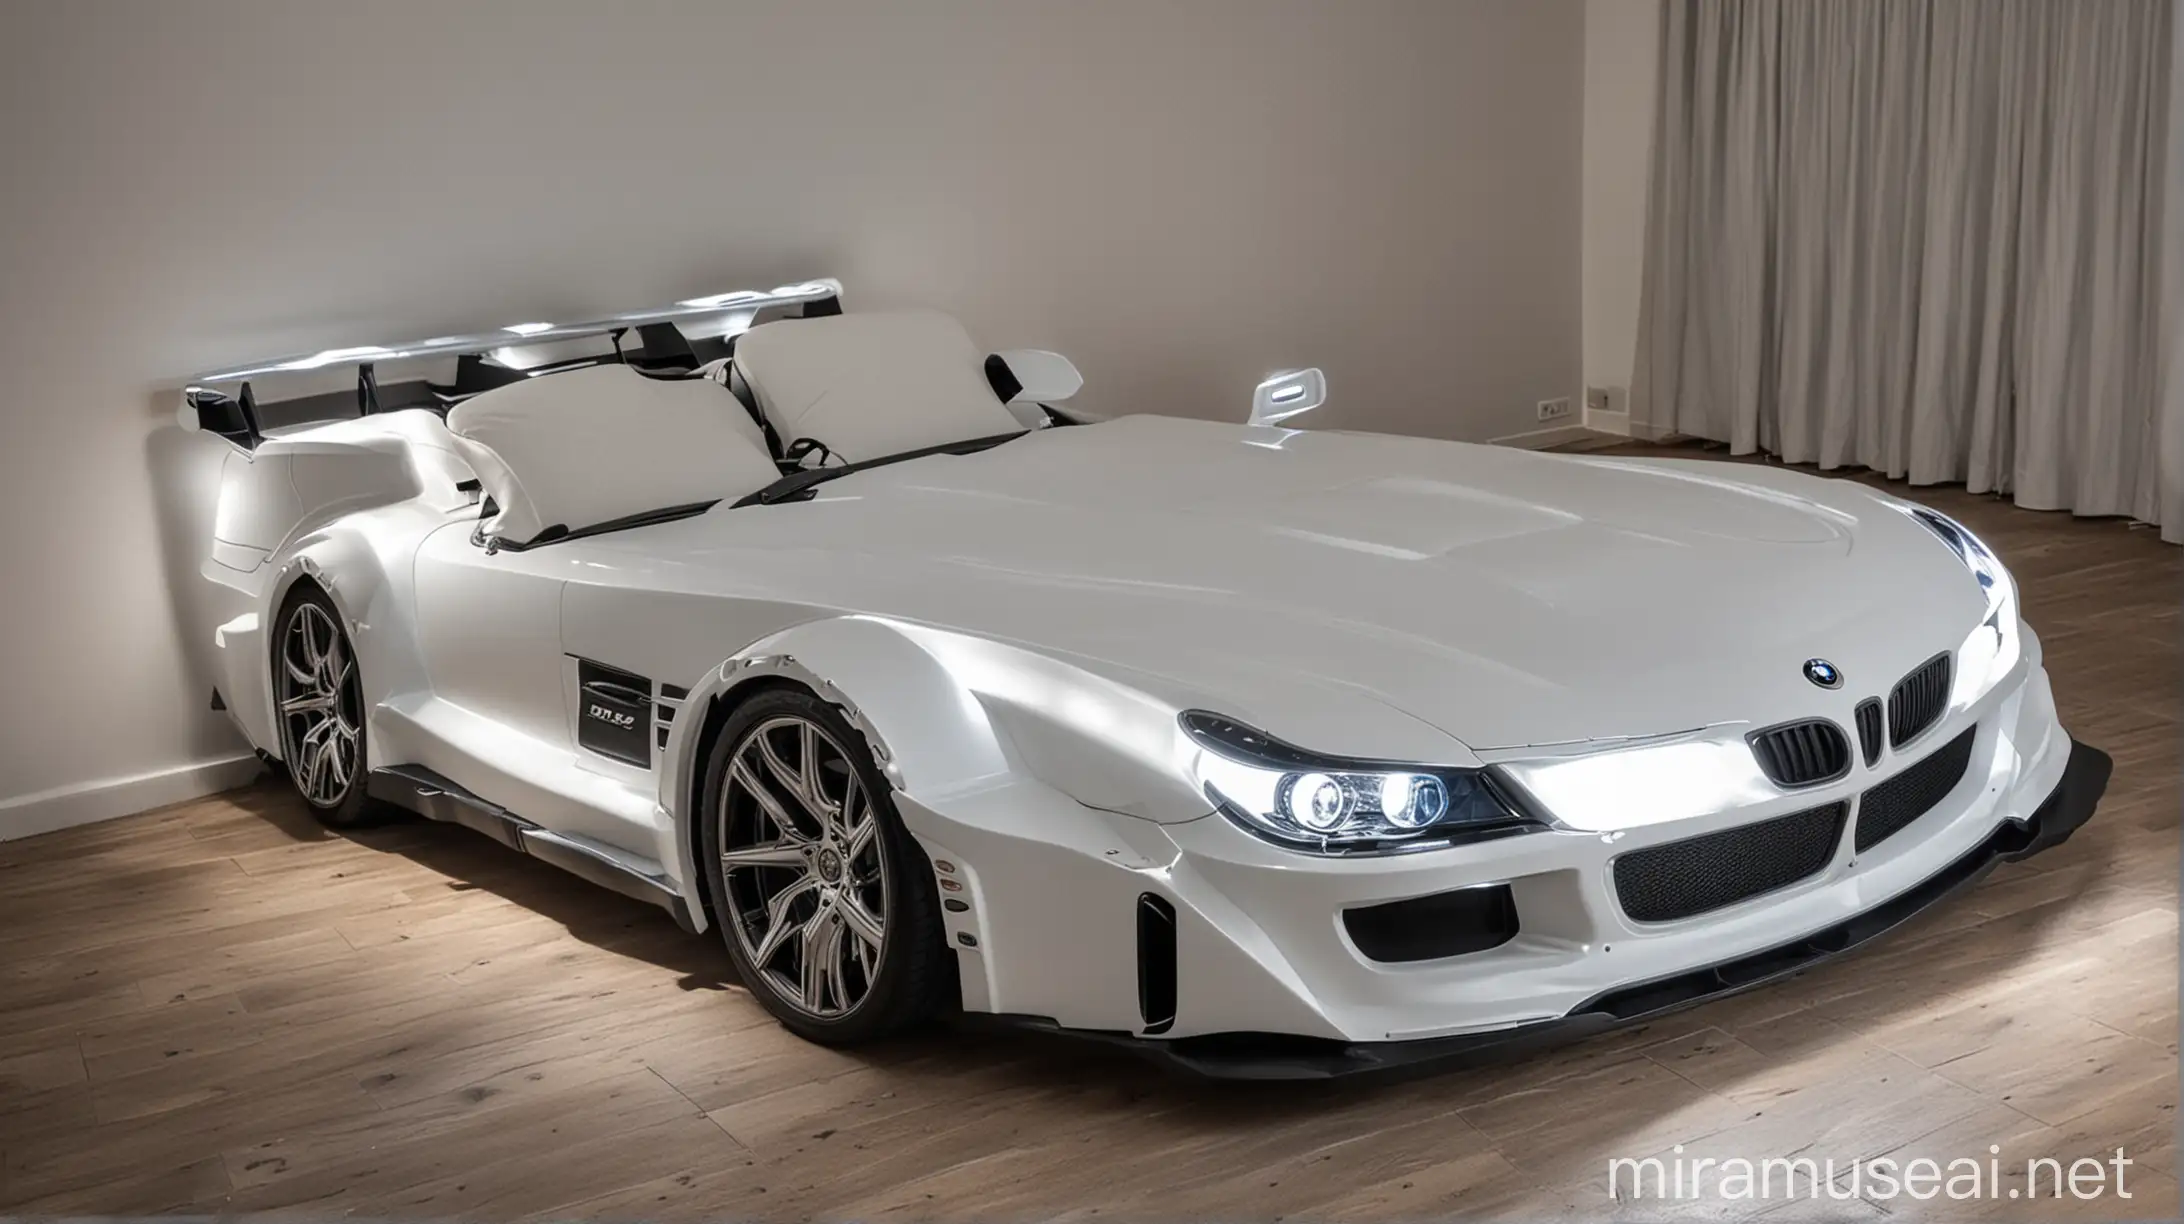 Luxurious BMW AMG CarShaped Double Bed with Illuminated Headlights